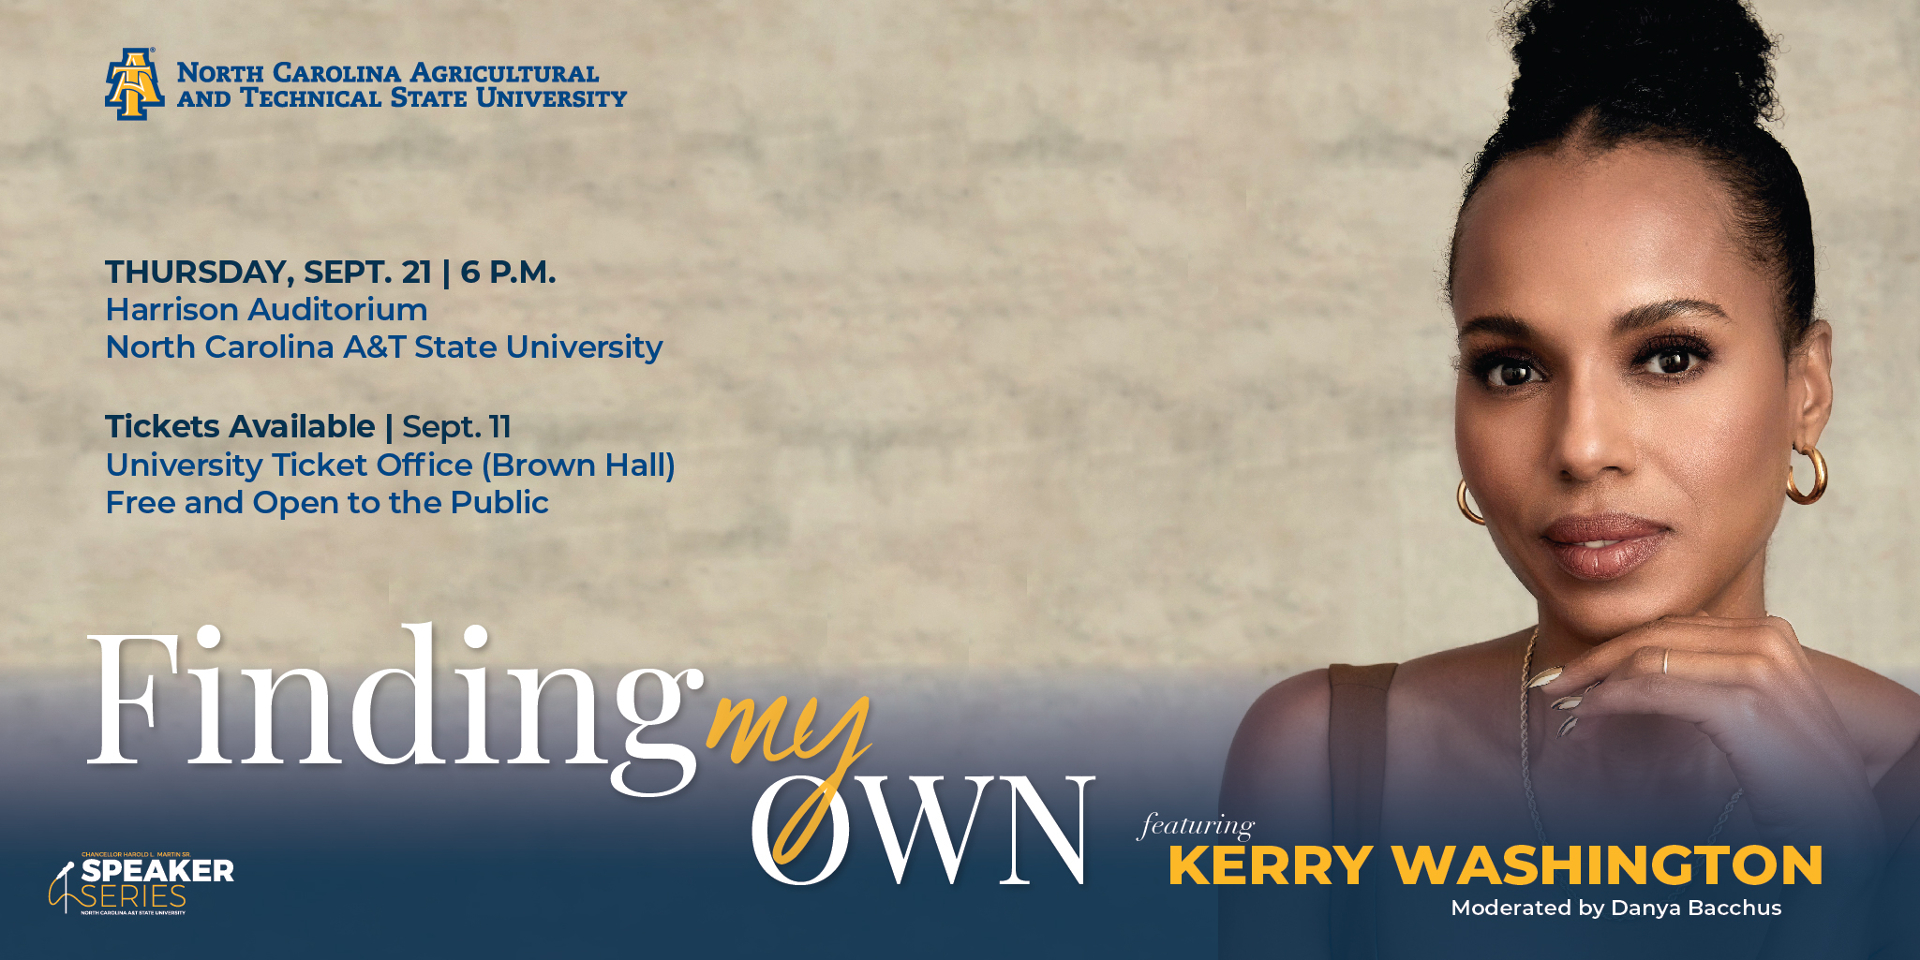 "Finding My Own" - N.C. A&T Chancellor's Speaker Series with Kerry Washington